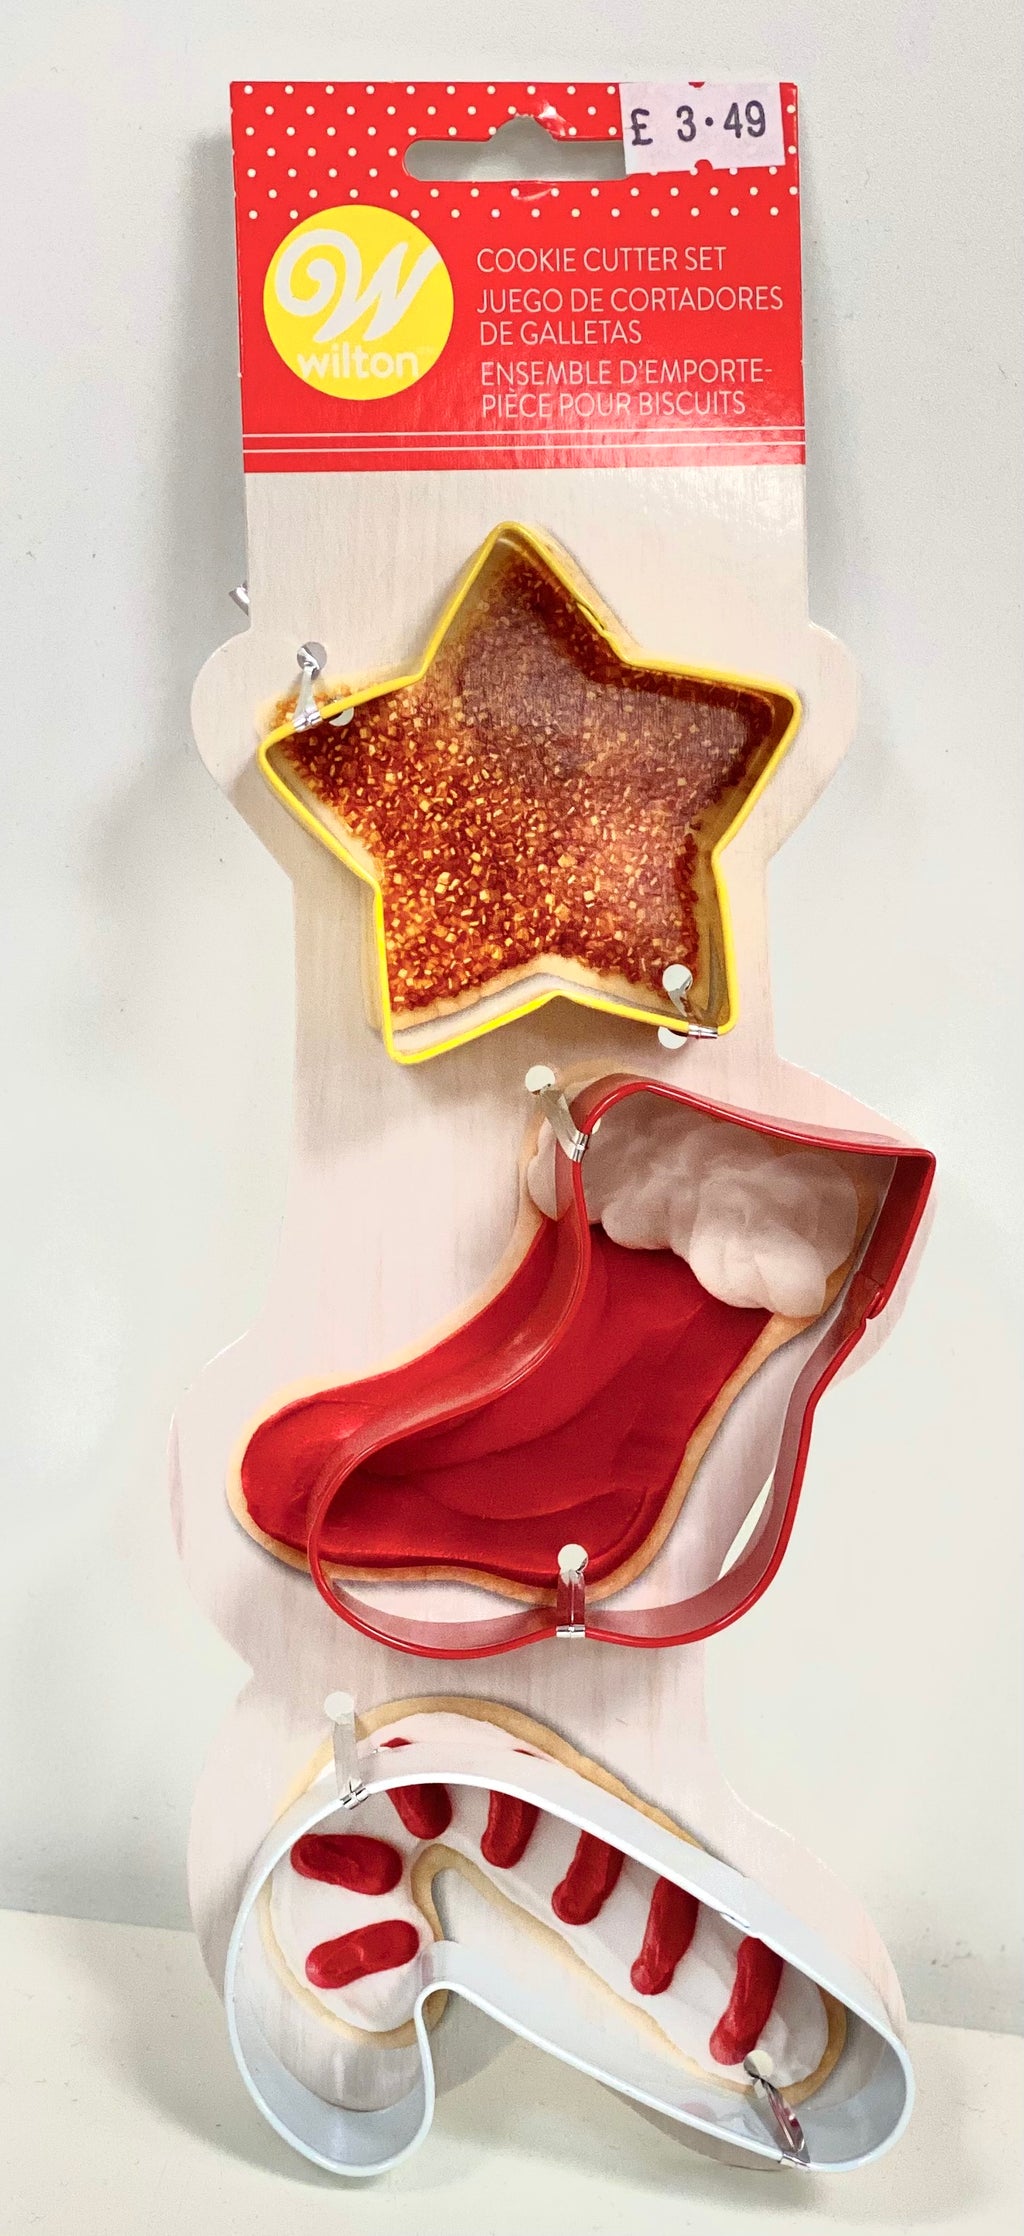 Wilton Christmas Cookie Cutter Sets